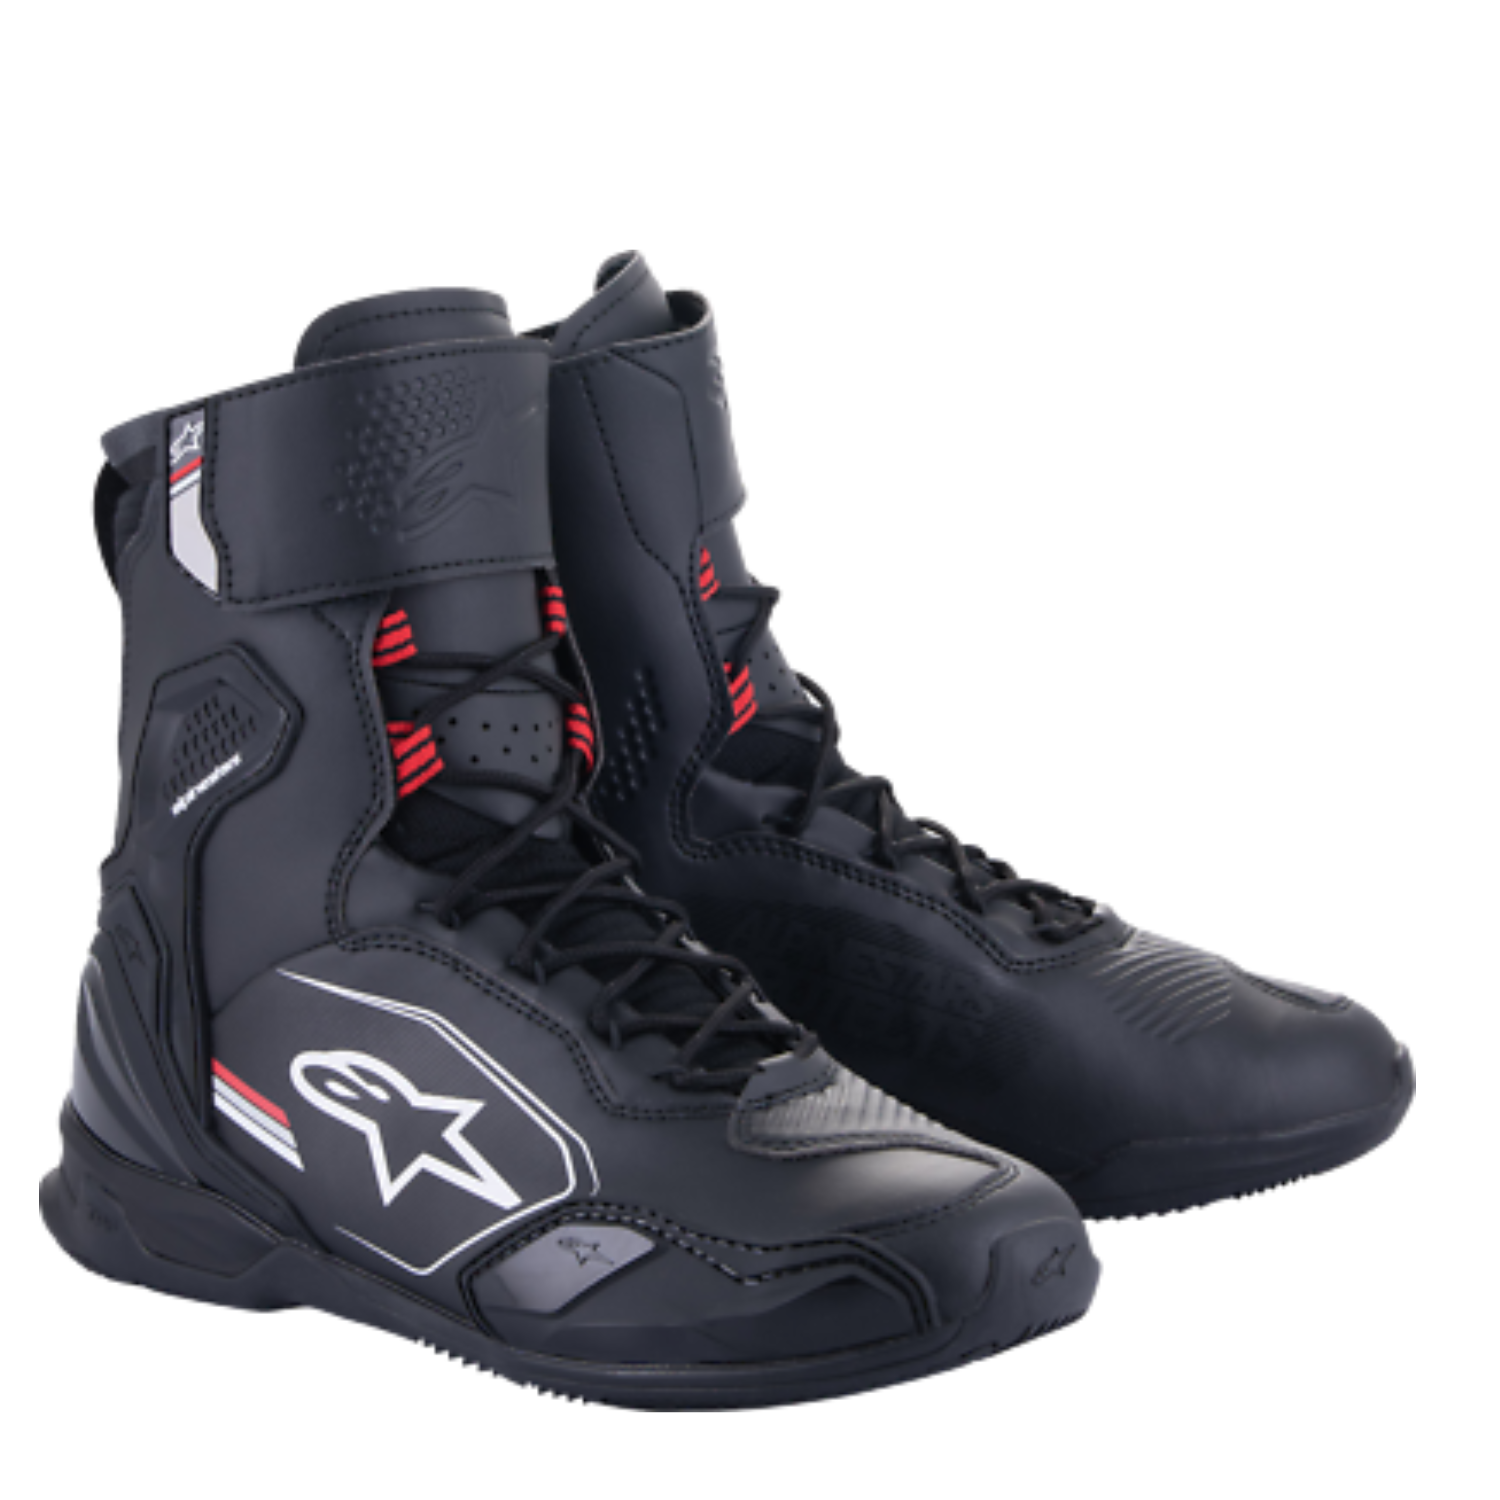 Image of Alpinestars Superfaster Shoes Black Gray Bright Red Taille US 13